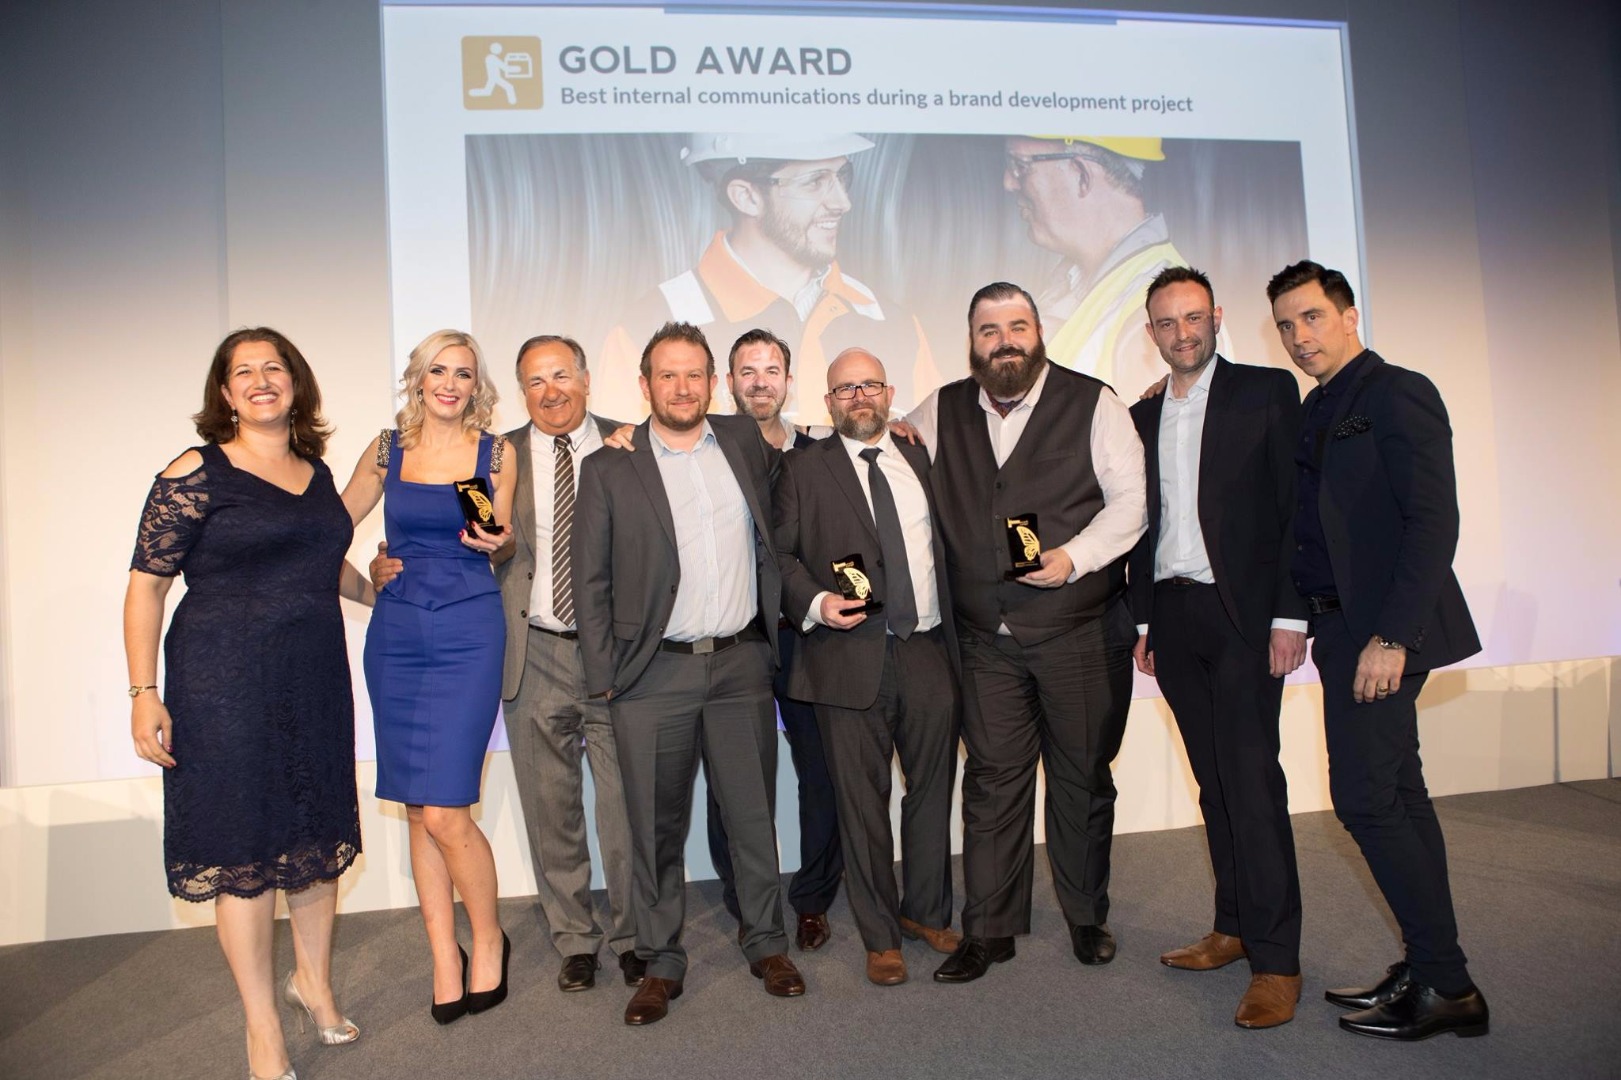 Gold for Best Internal Communications during a Brand Development Project at Transform Awards Europe